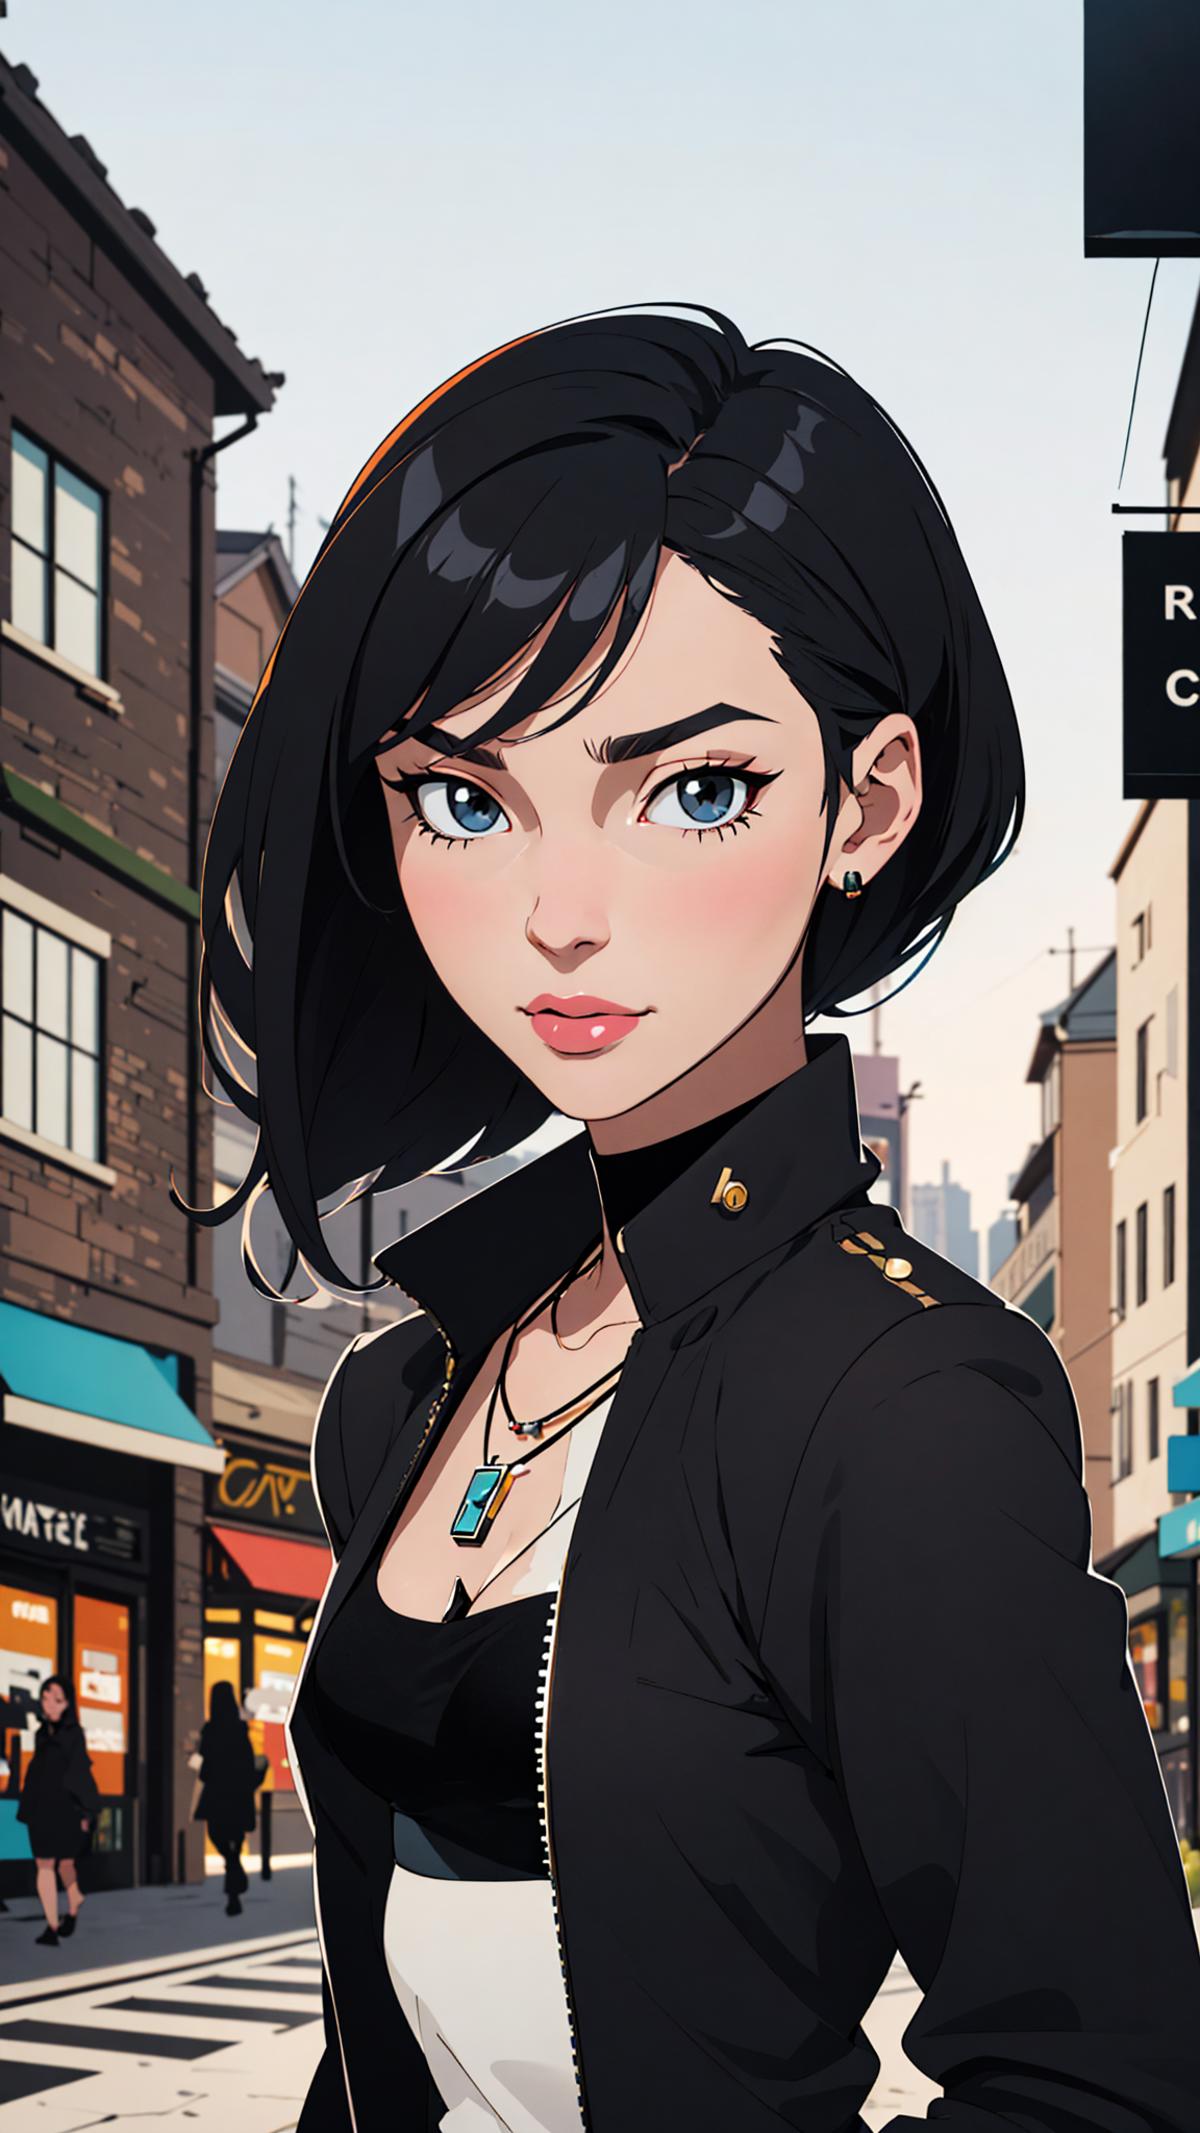 A cartoon illustration of a woman with blue eyes, black hair, and a black jacket.